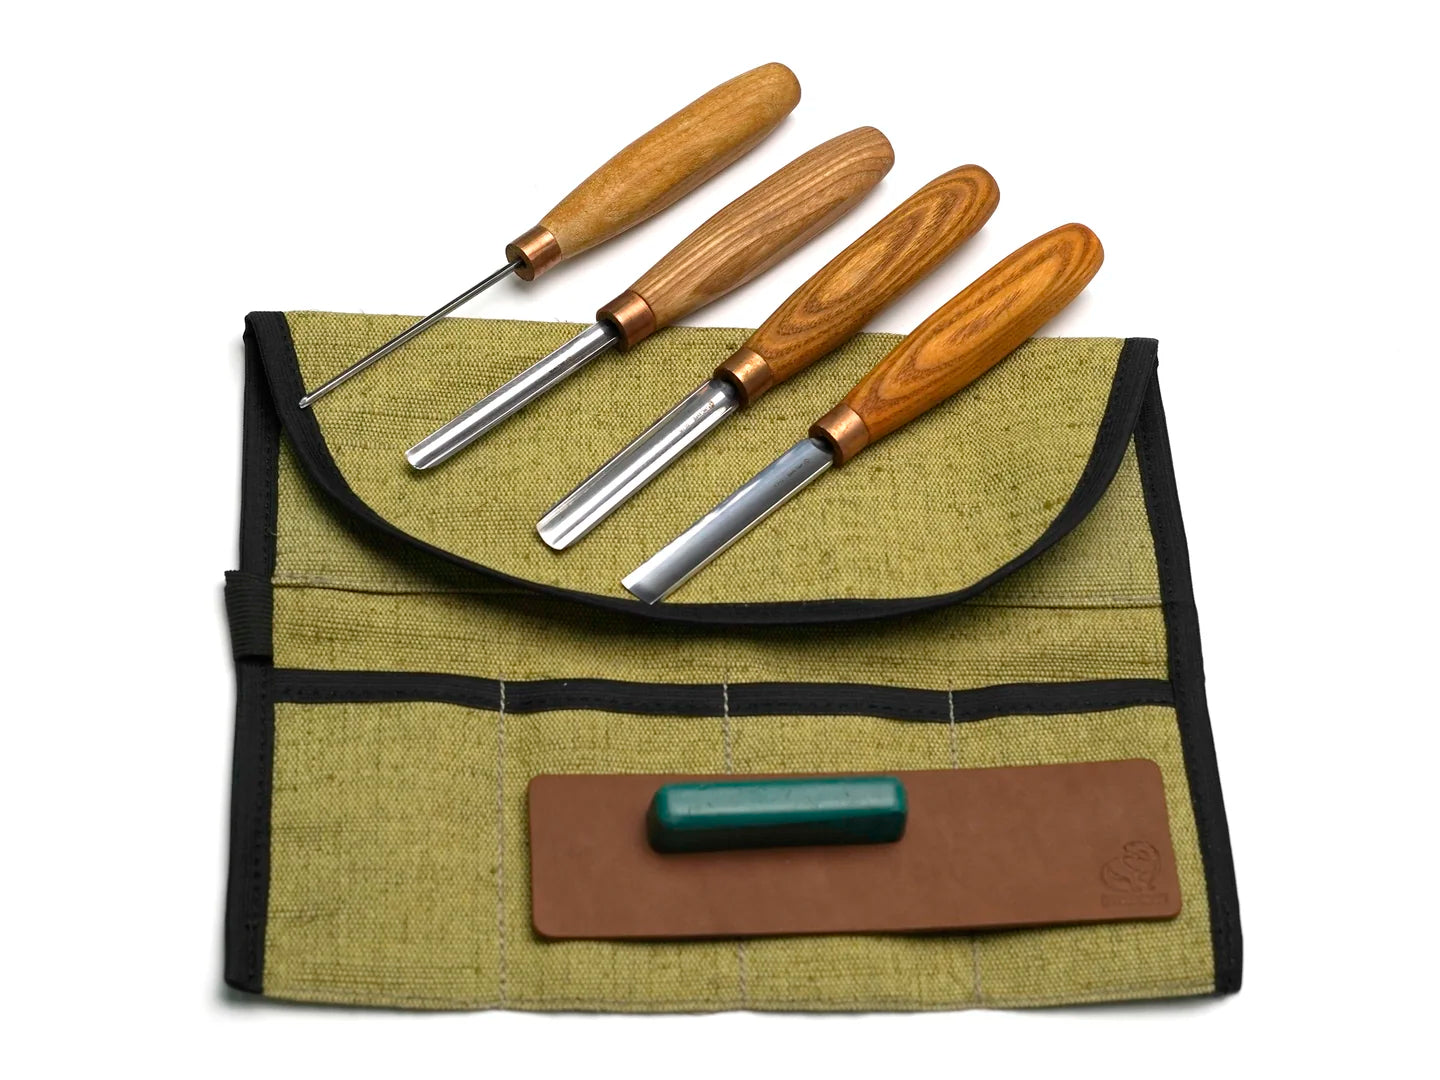 Buy straight chisel sets  woodcarving tools online - BeaverCraft